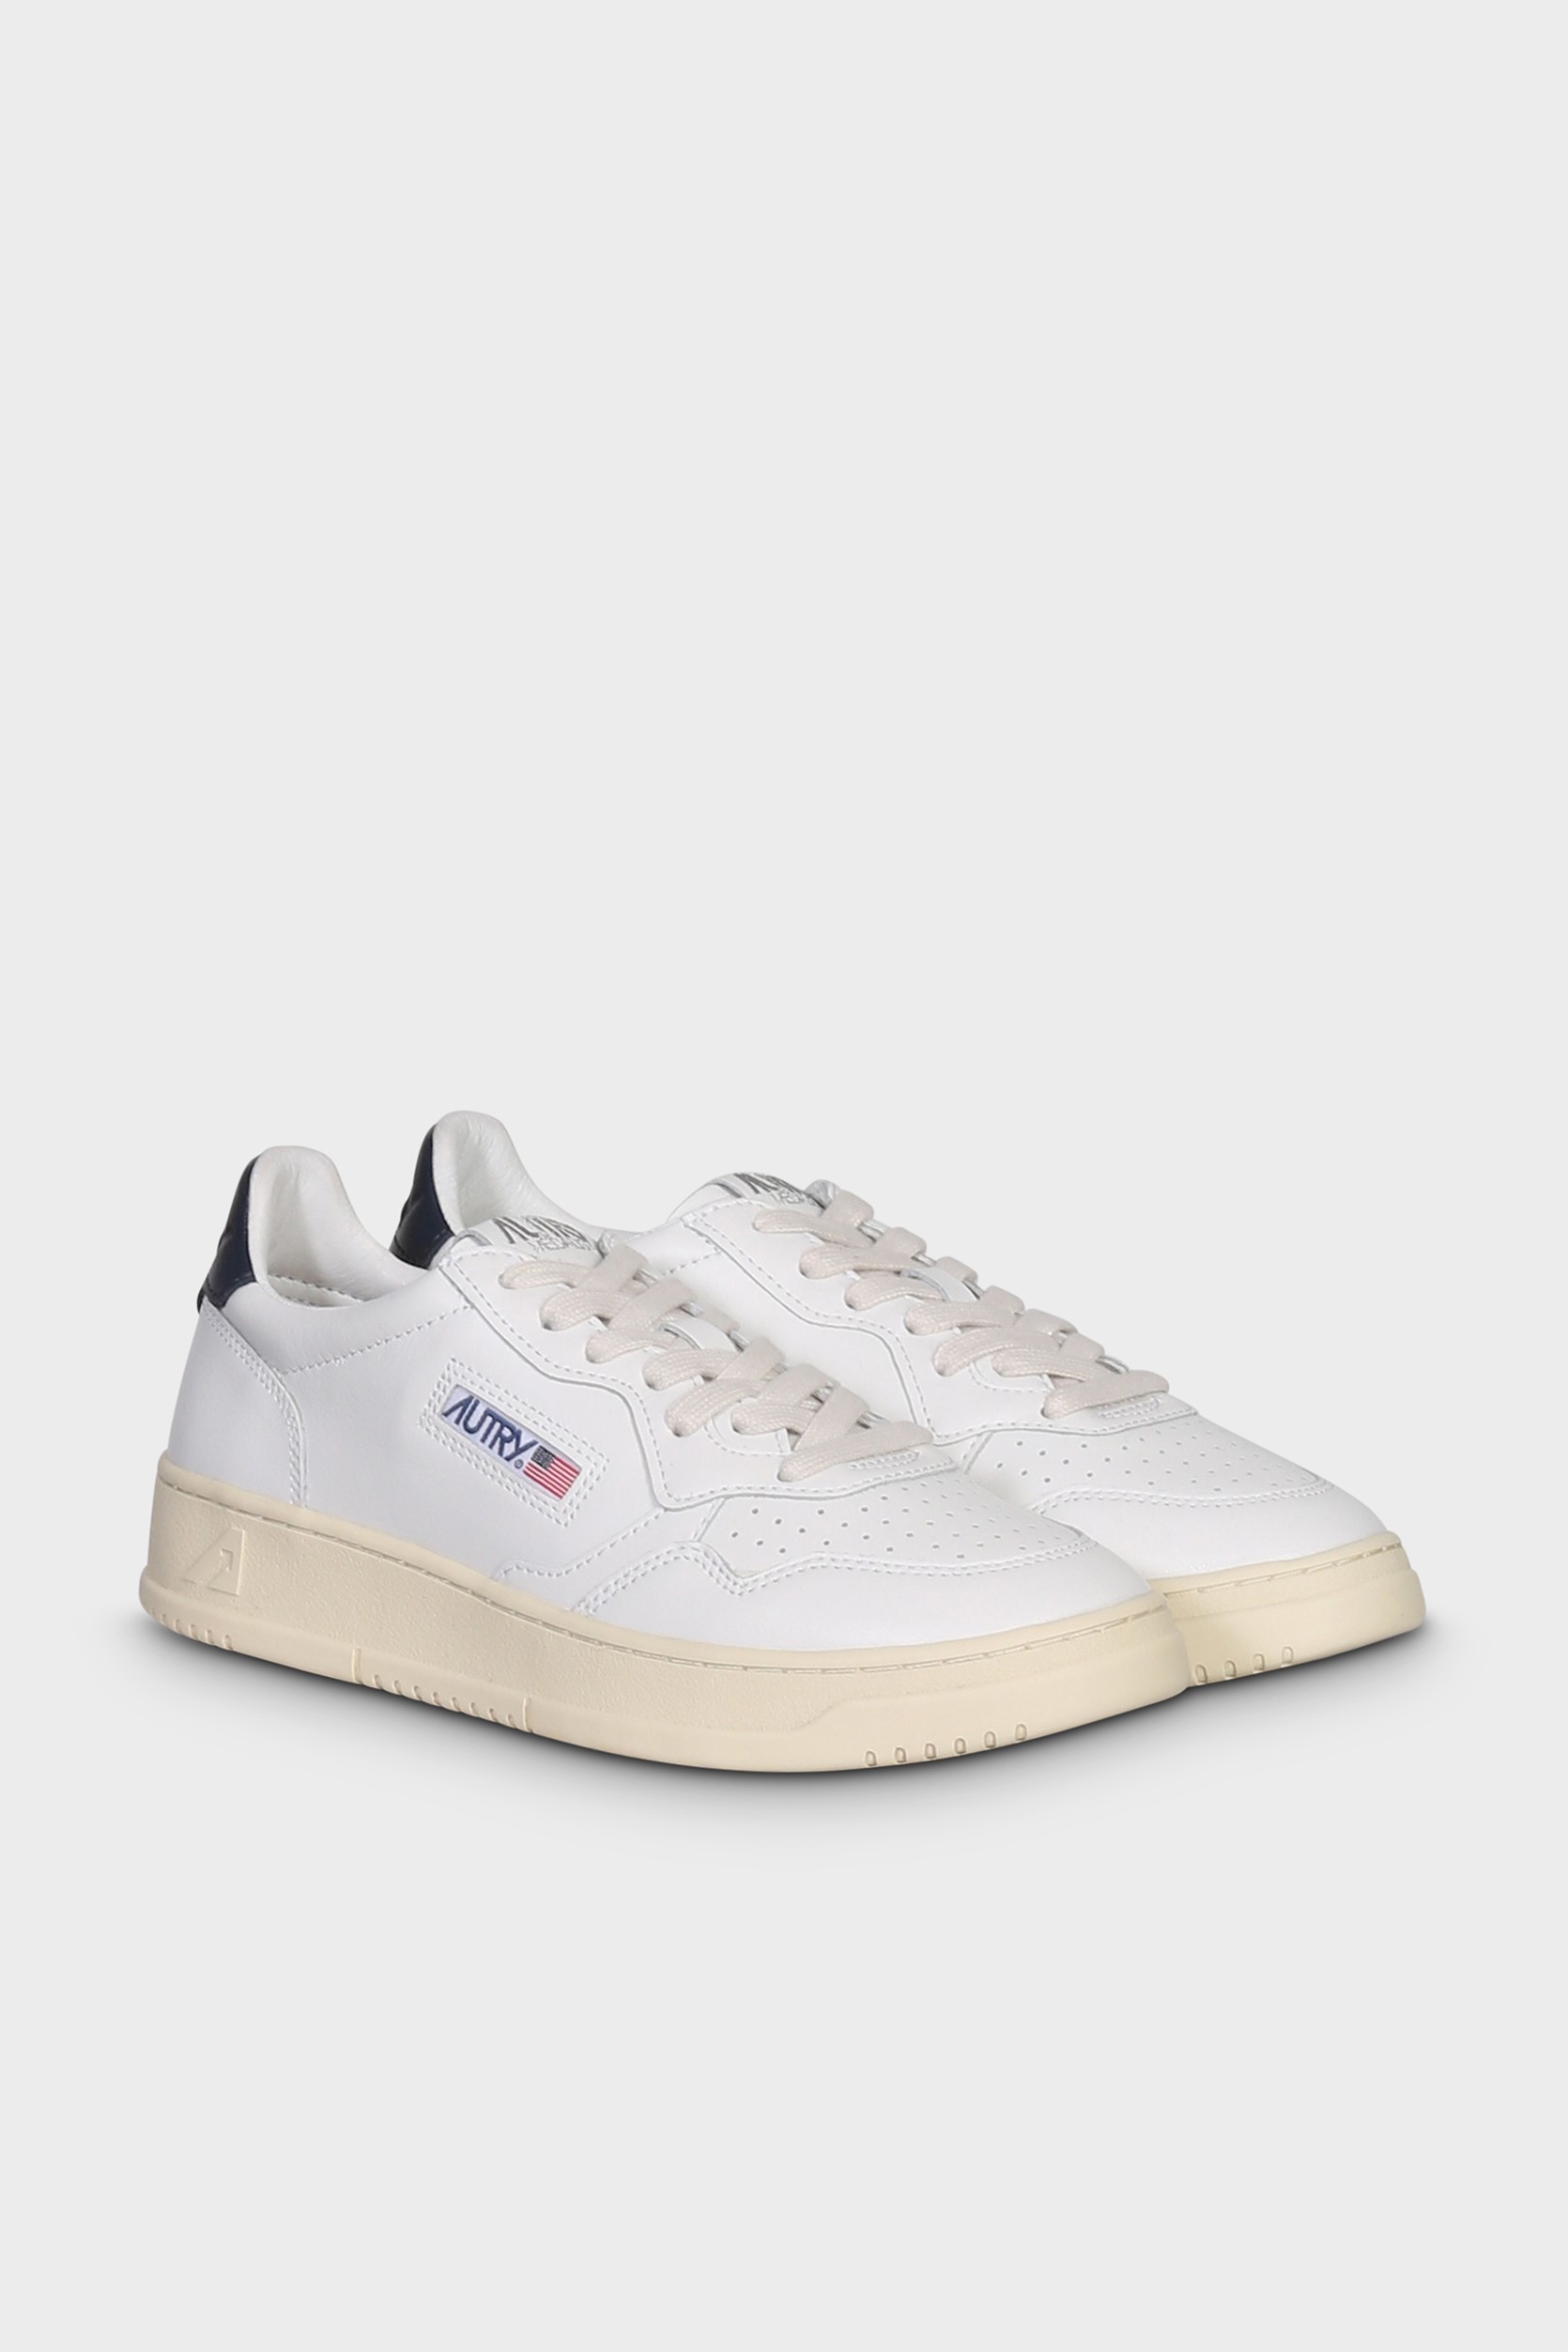 AUTRY ACTION SHOES Medalist Low Sneaker White/Space 42